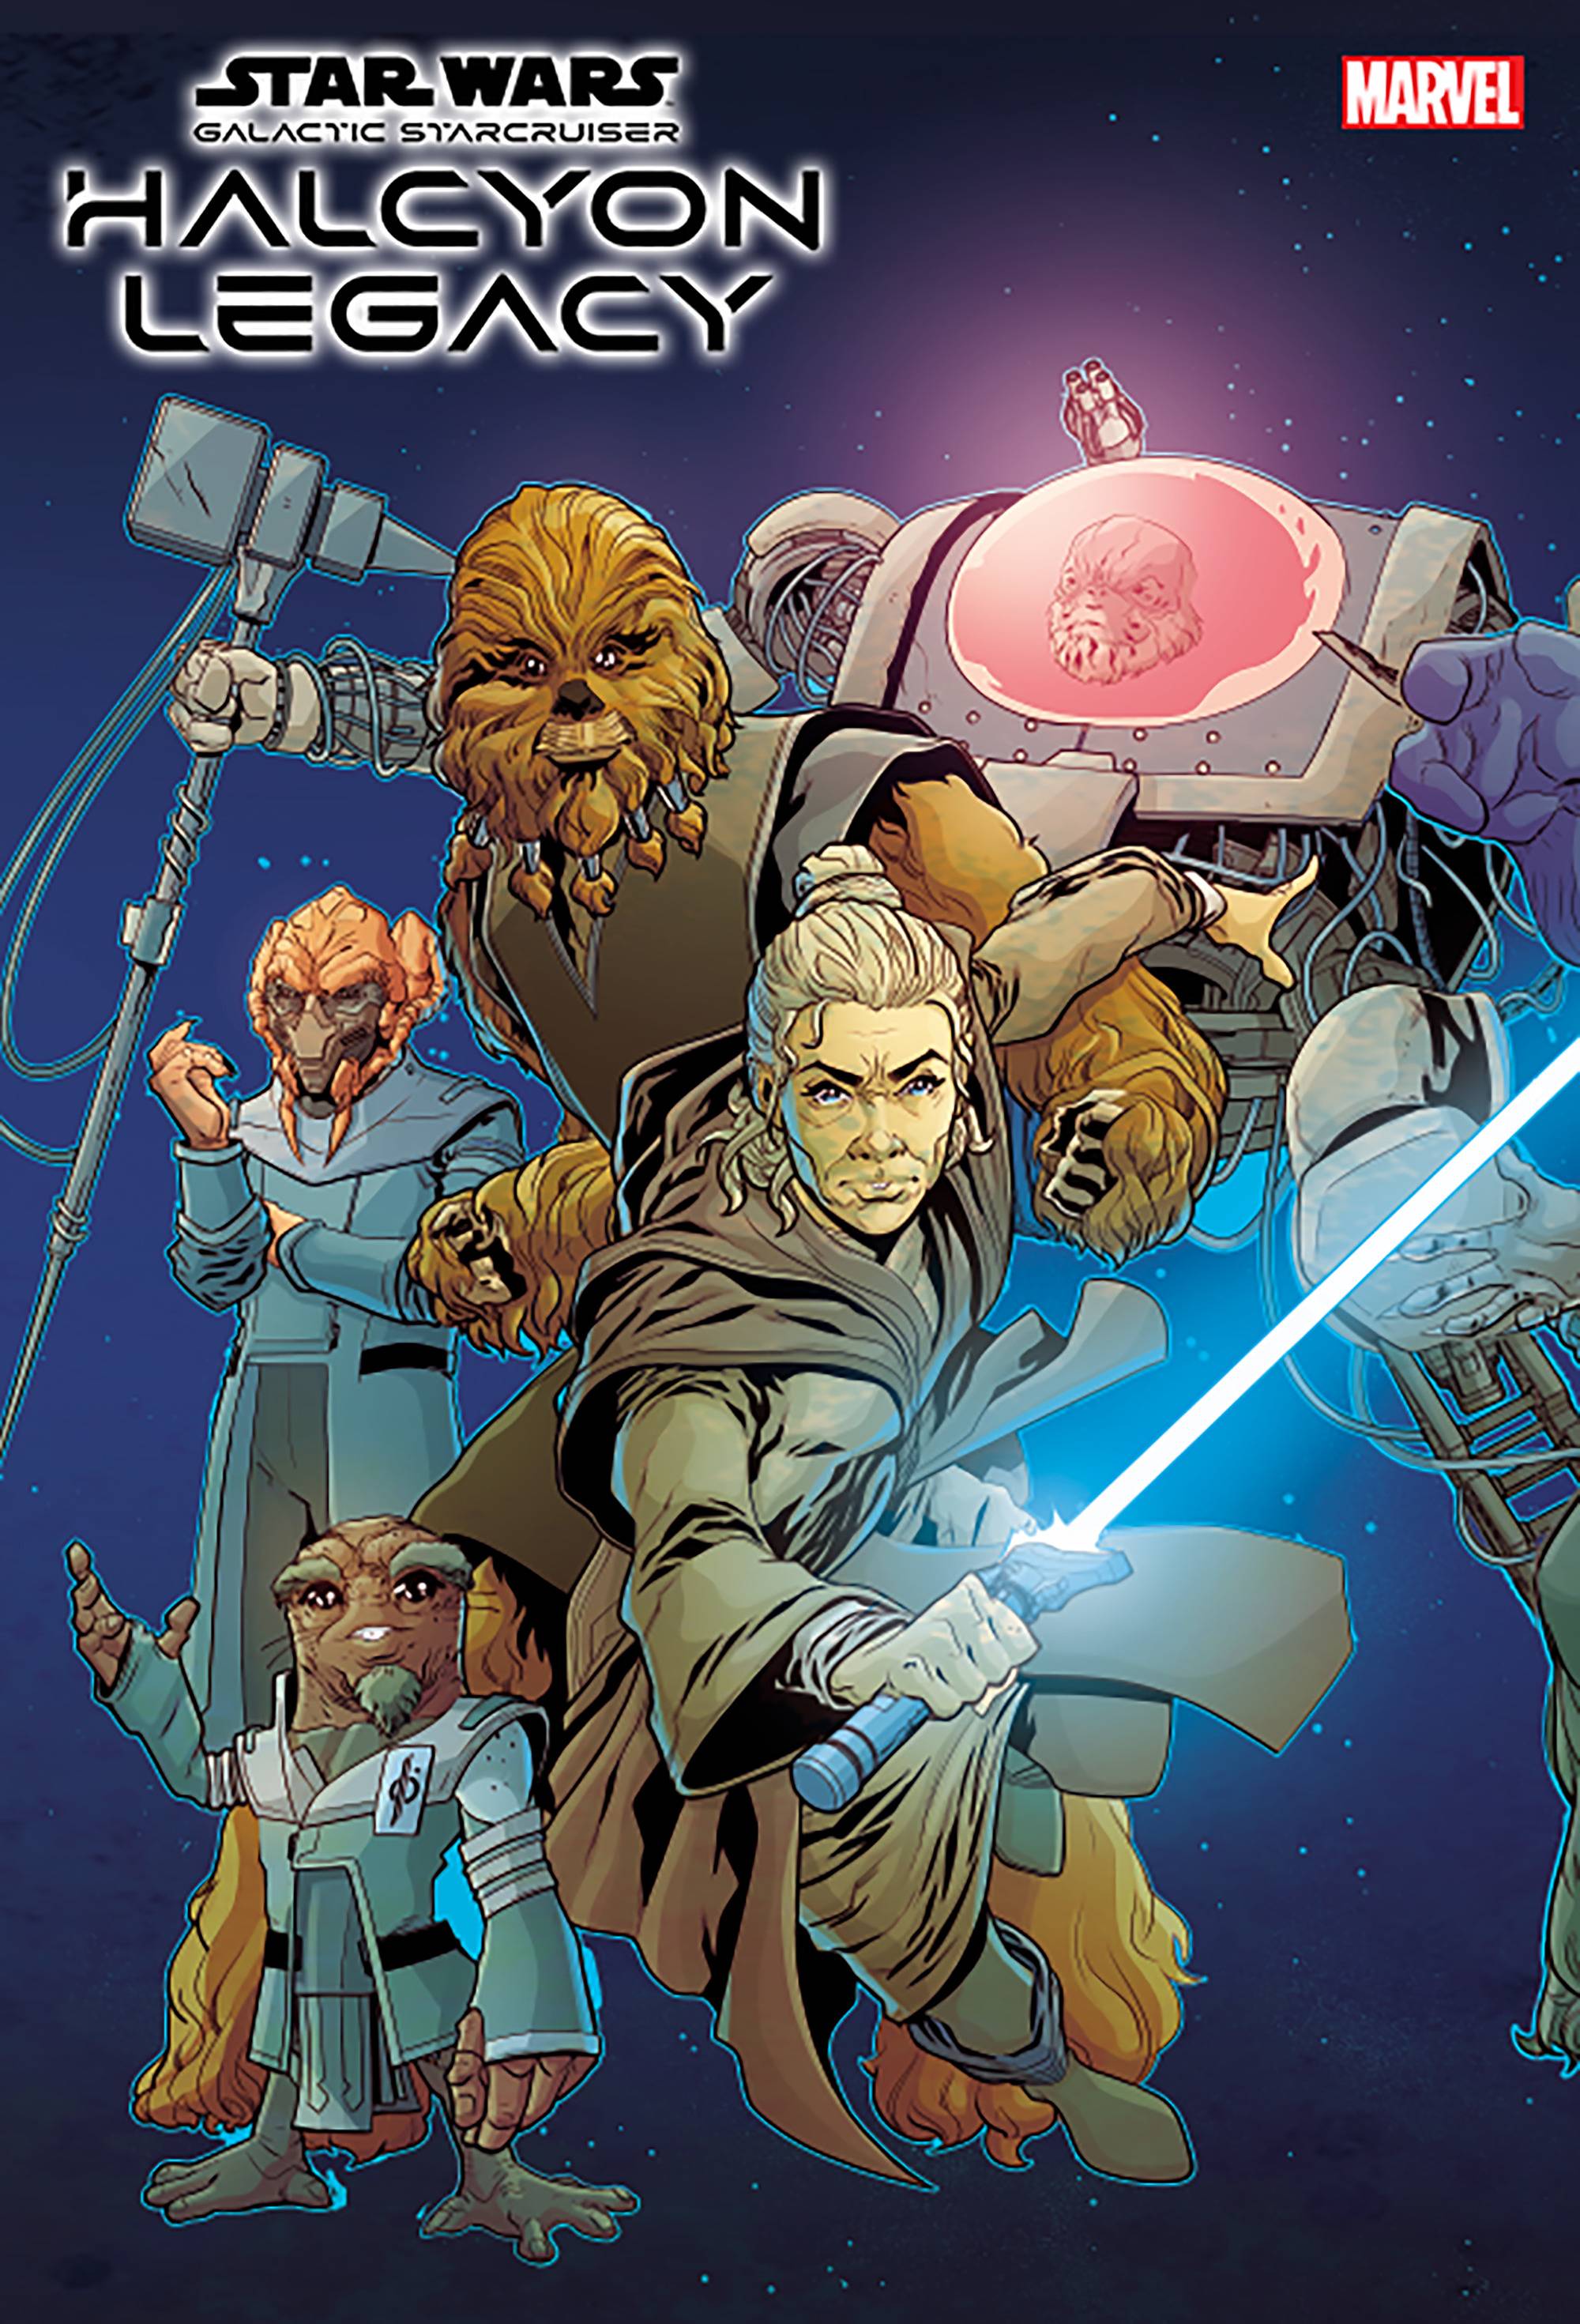 STAR WARS HALCYON LEGACY #1 (OF 5) SLINEY CONNECTING VAR